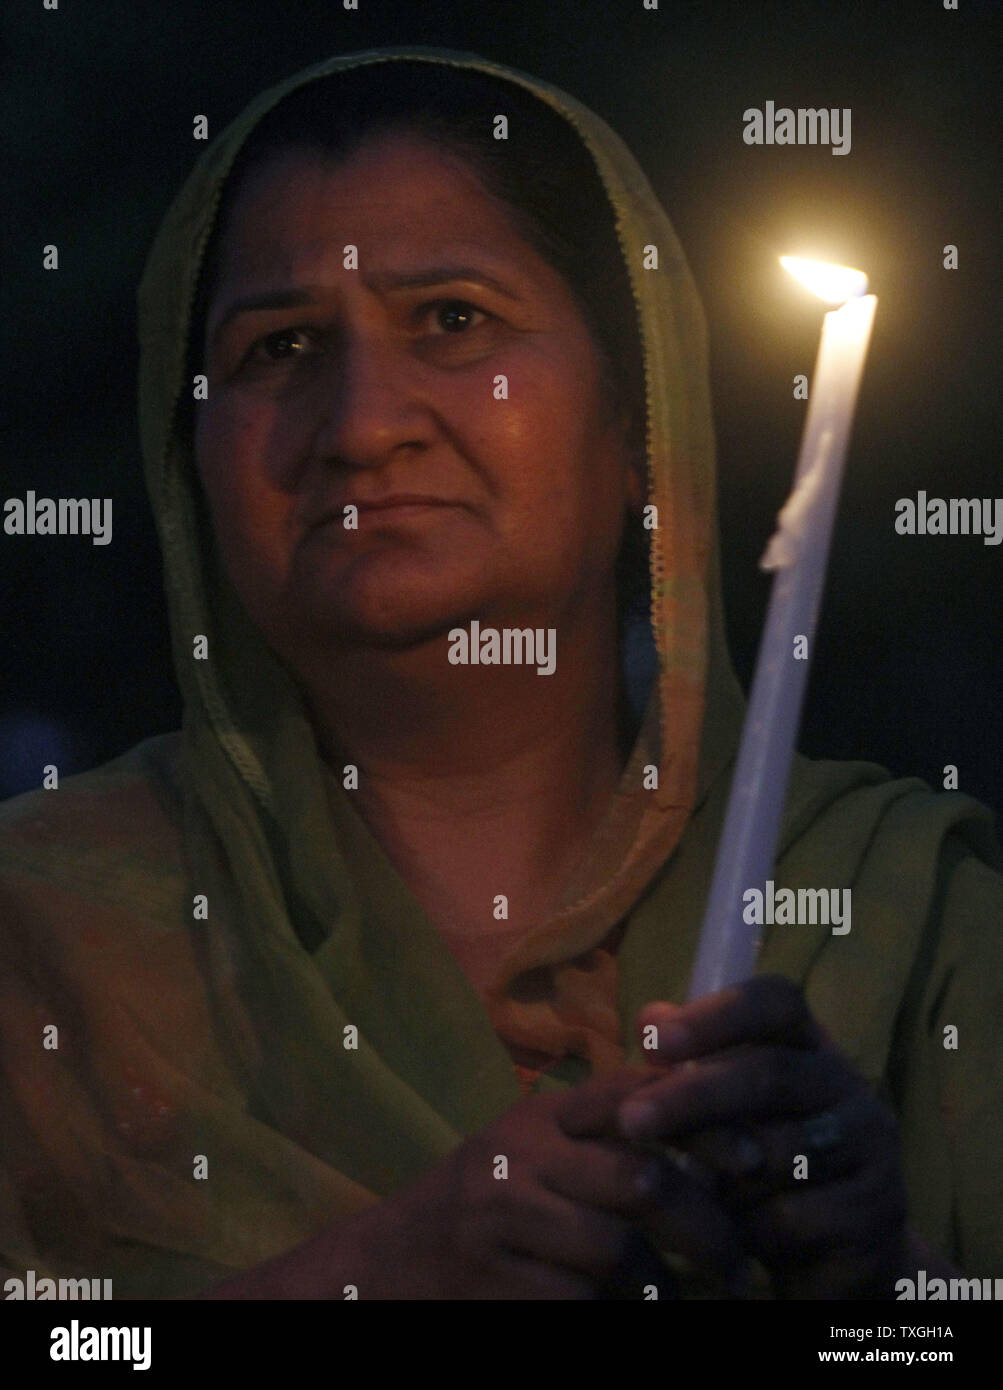 A memeber of the Sikh community pauses during a candlelight vigil August 6, 2012 in Brookfield, Wisconsin. Police have identified Wade Michael Page as their suspect in the shooting. Page, a former Army veteran, was killing in a shootout with police. UPI/Frank Polich Stock Photo